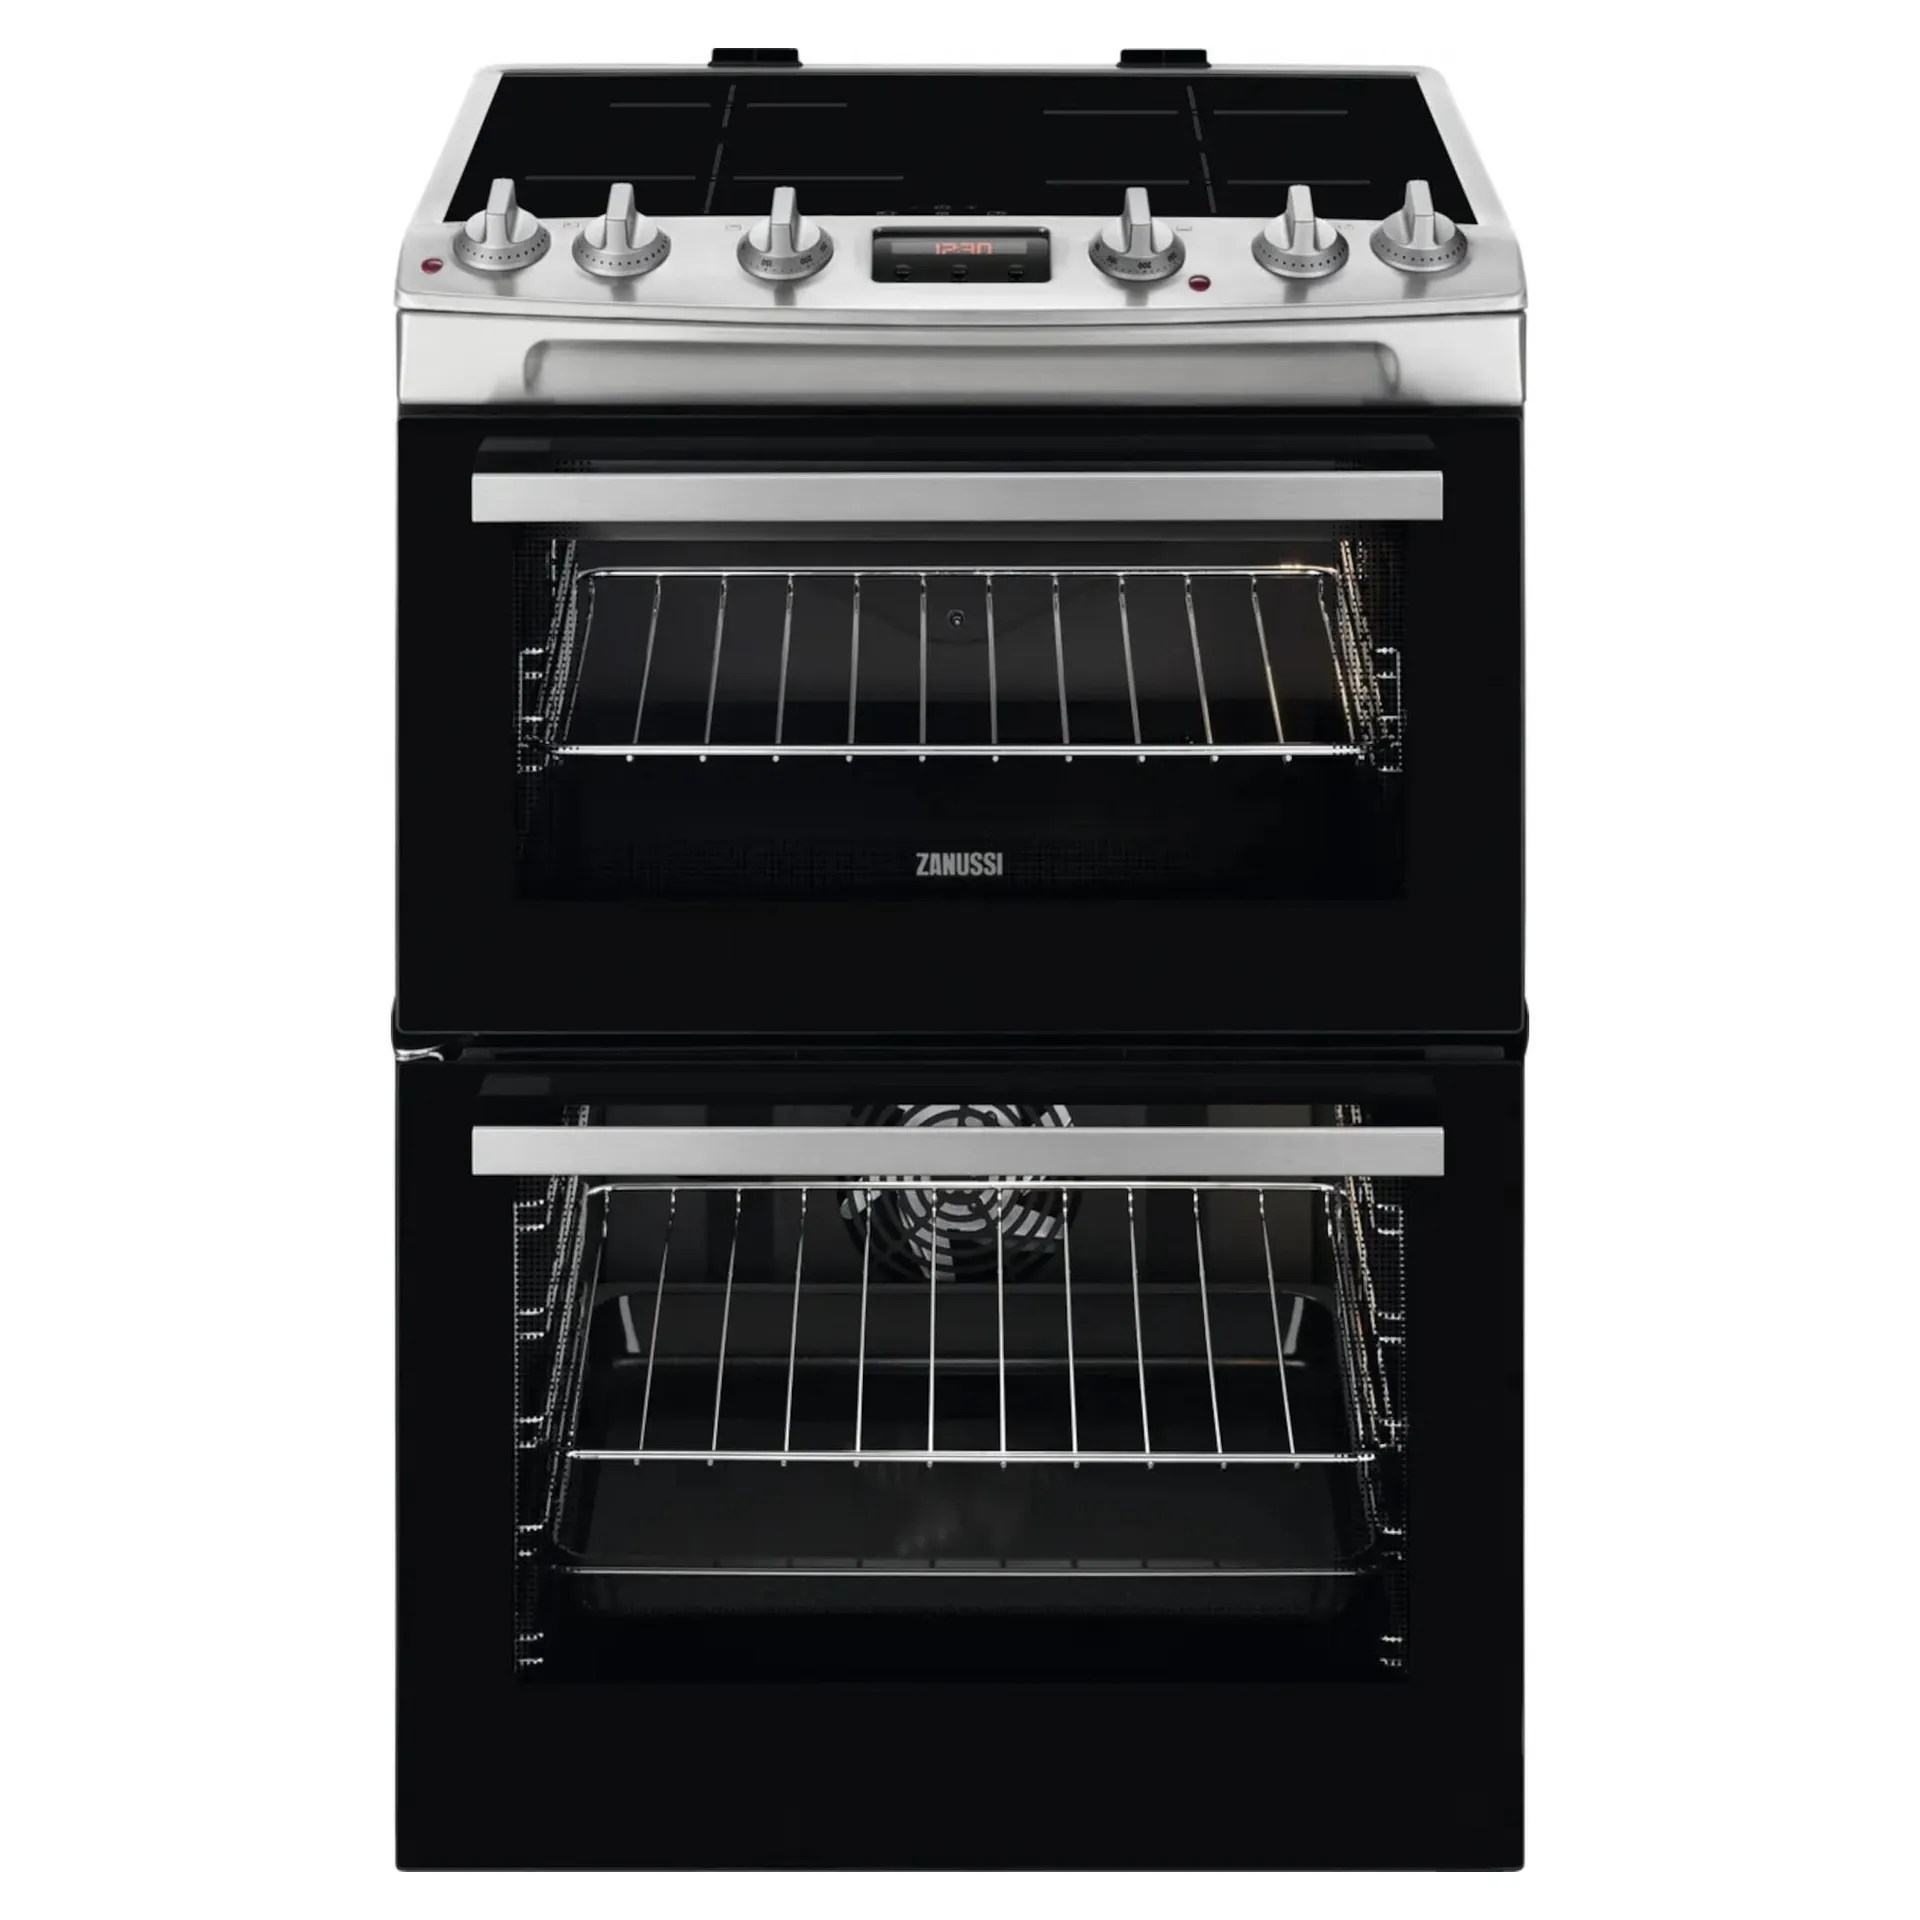 Zanussi ZCI66280XA Electric Cooker with Induction Hob